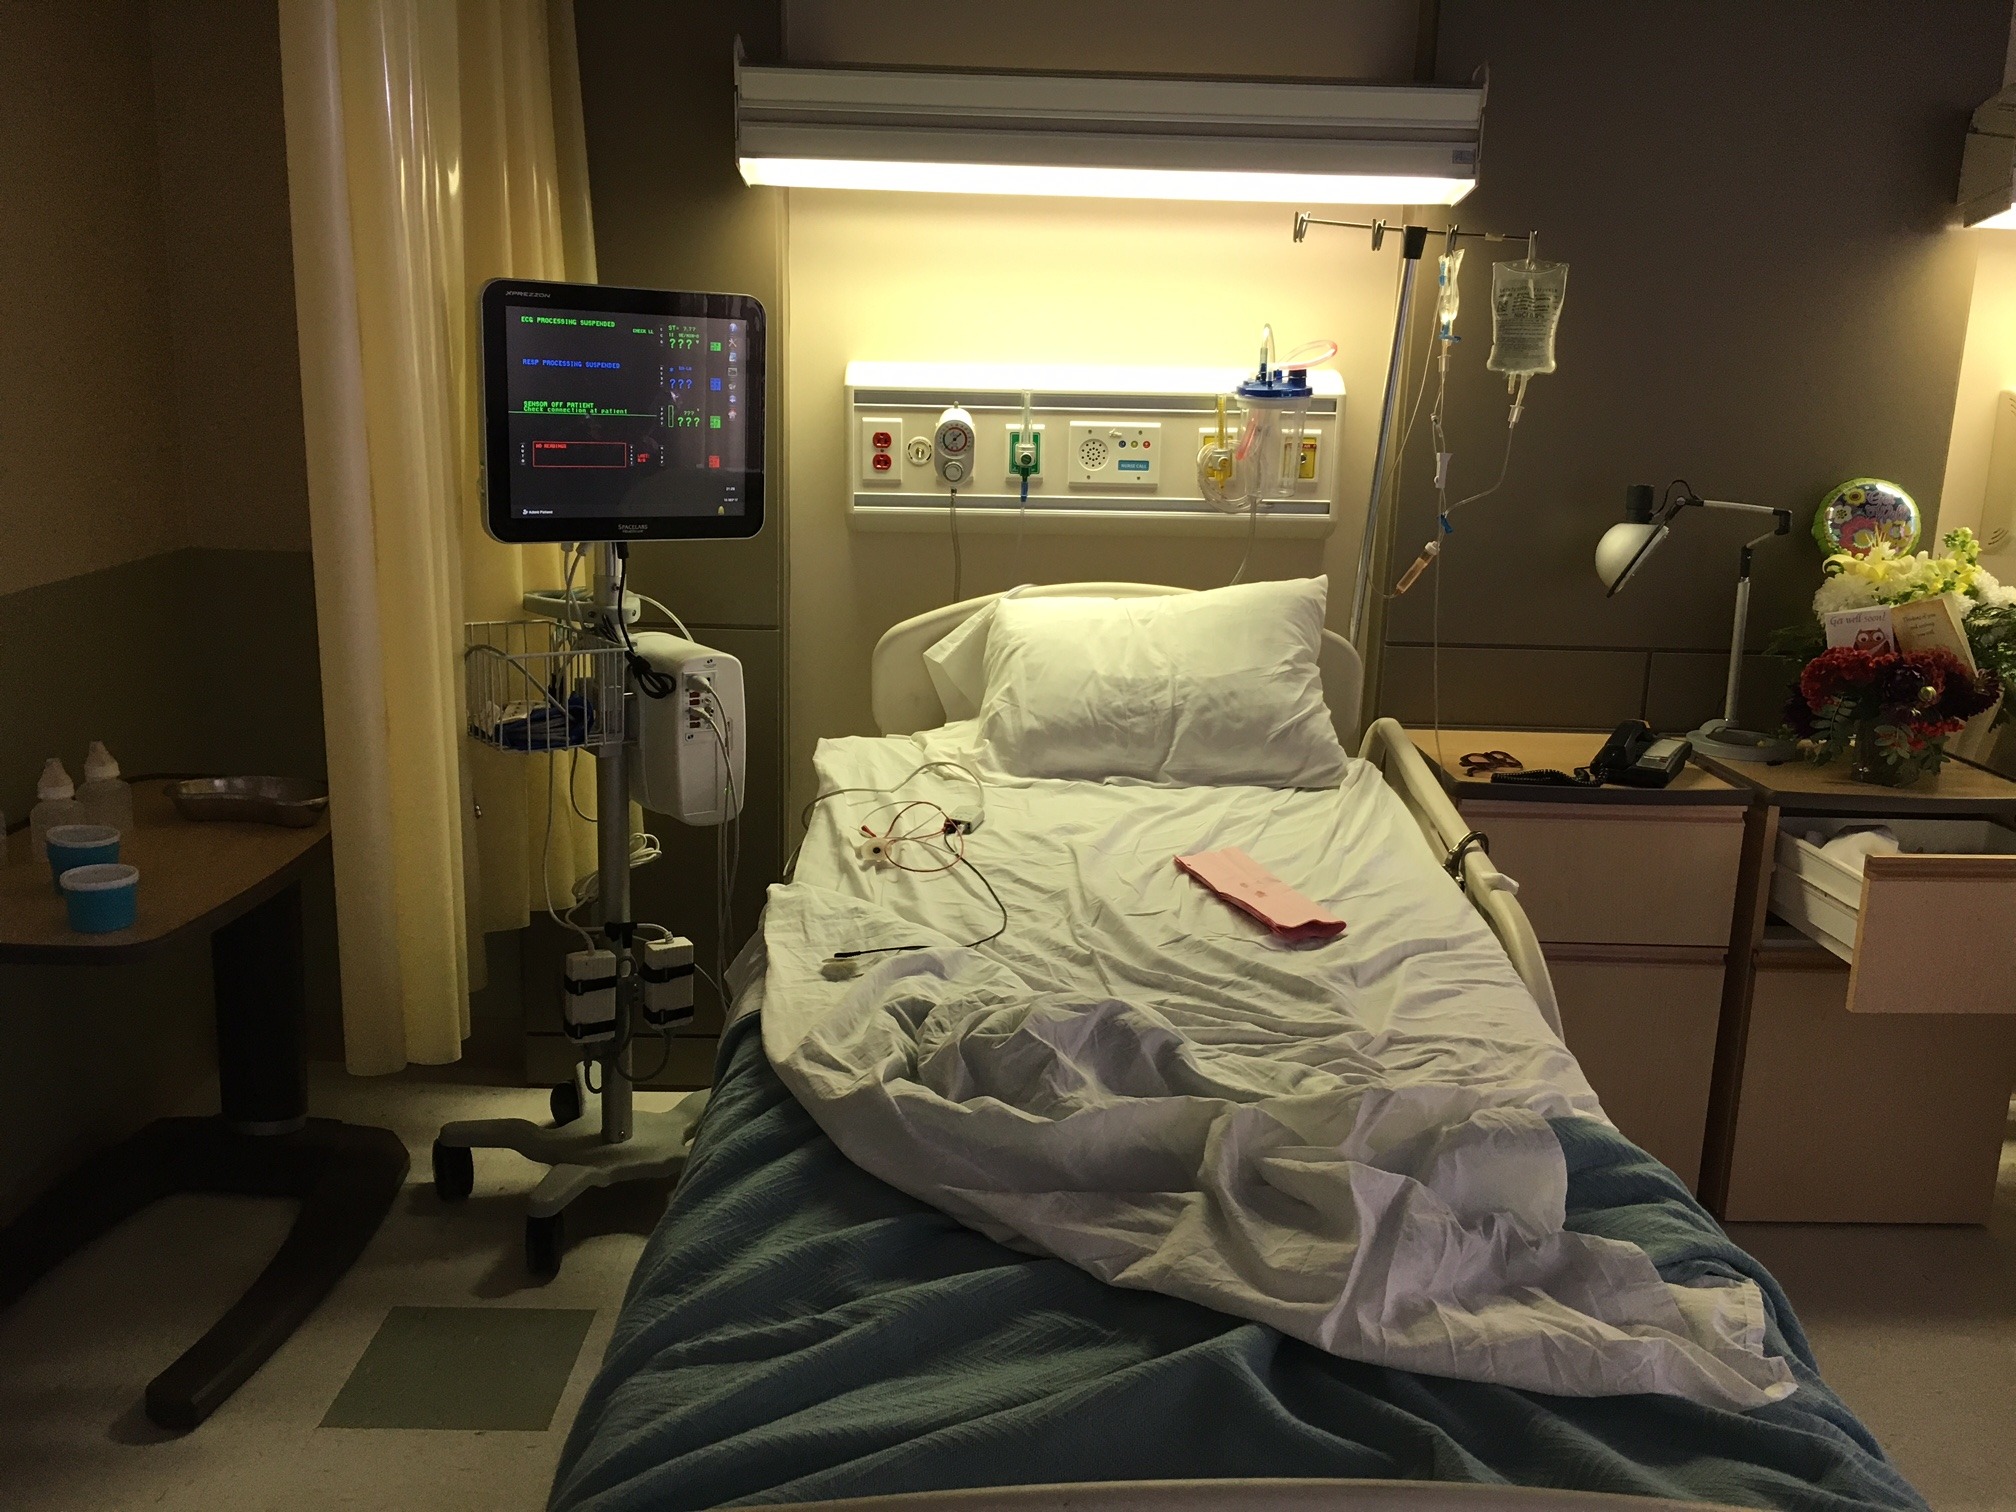 A hospital room including a bed, light, monitor and table with balloons and flowers